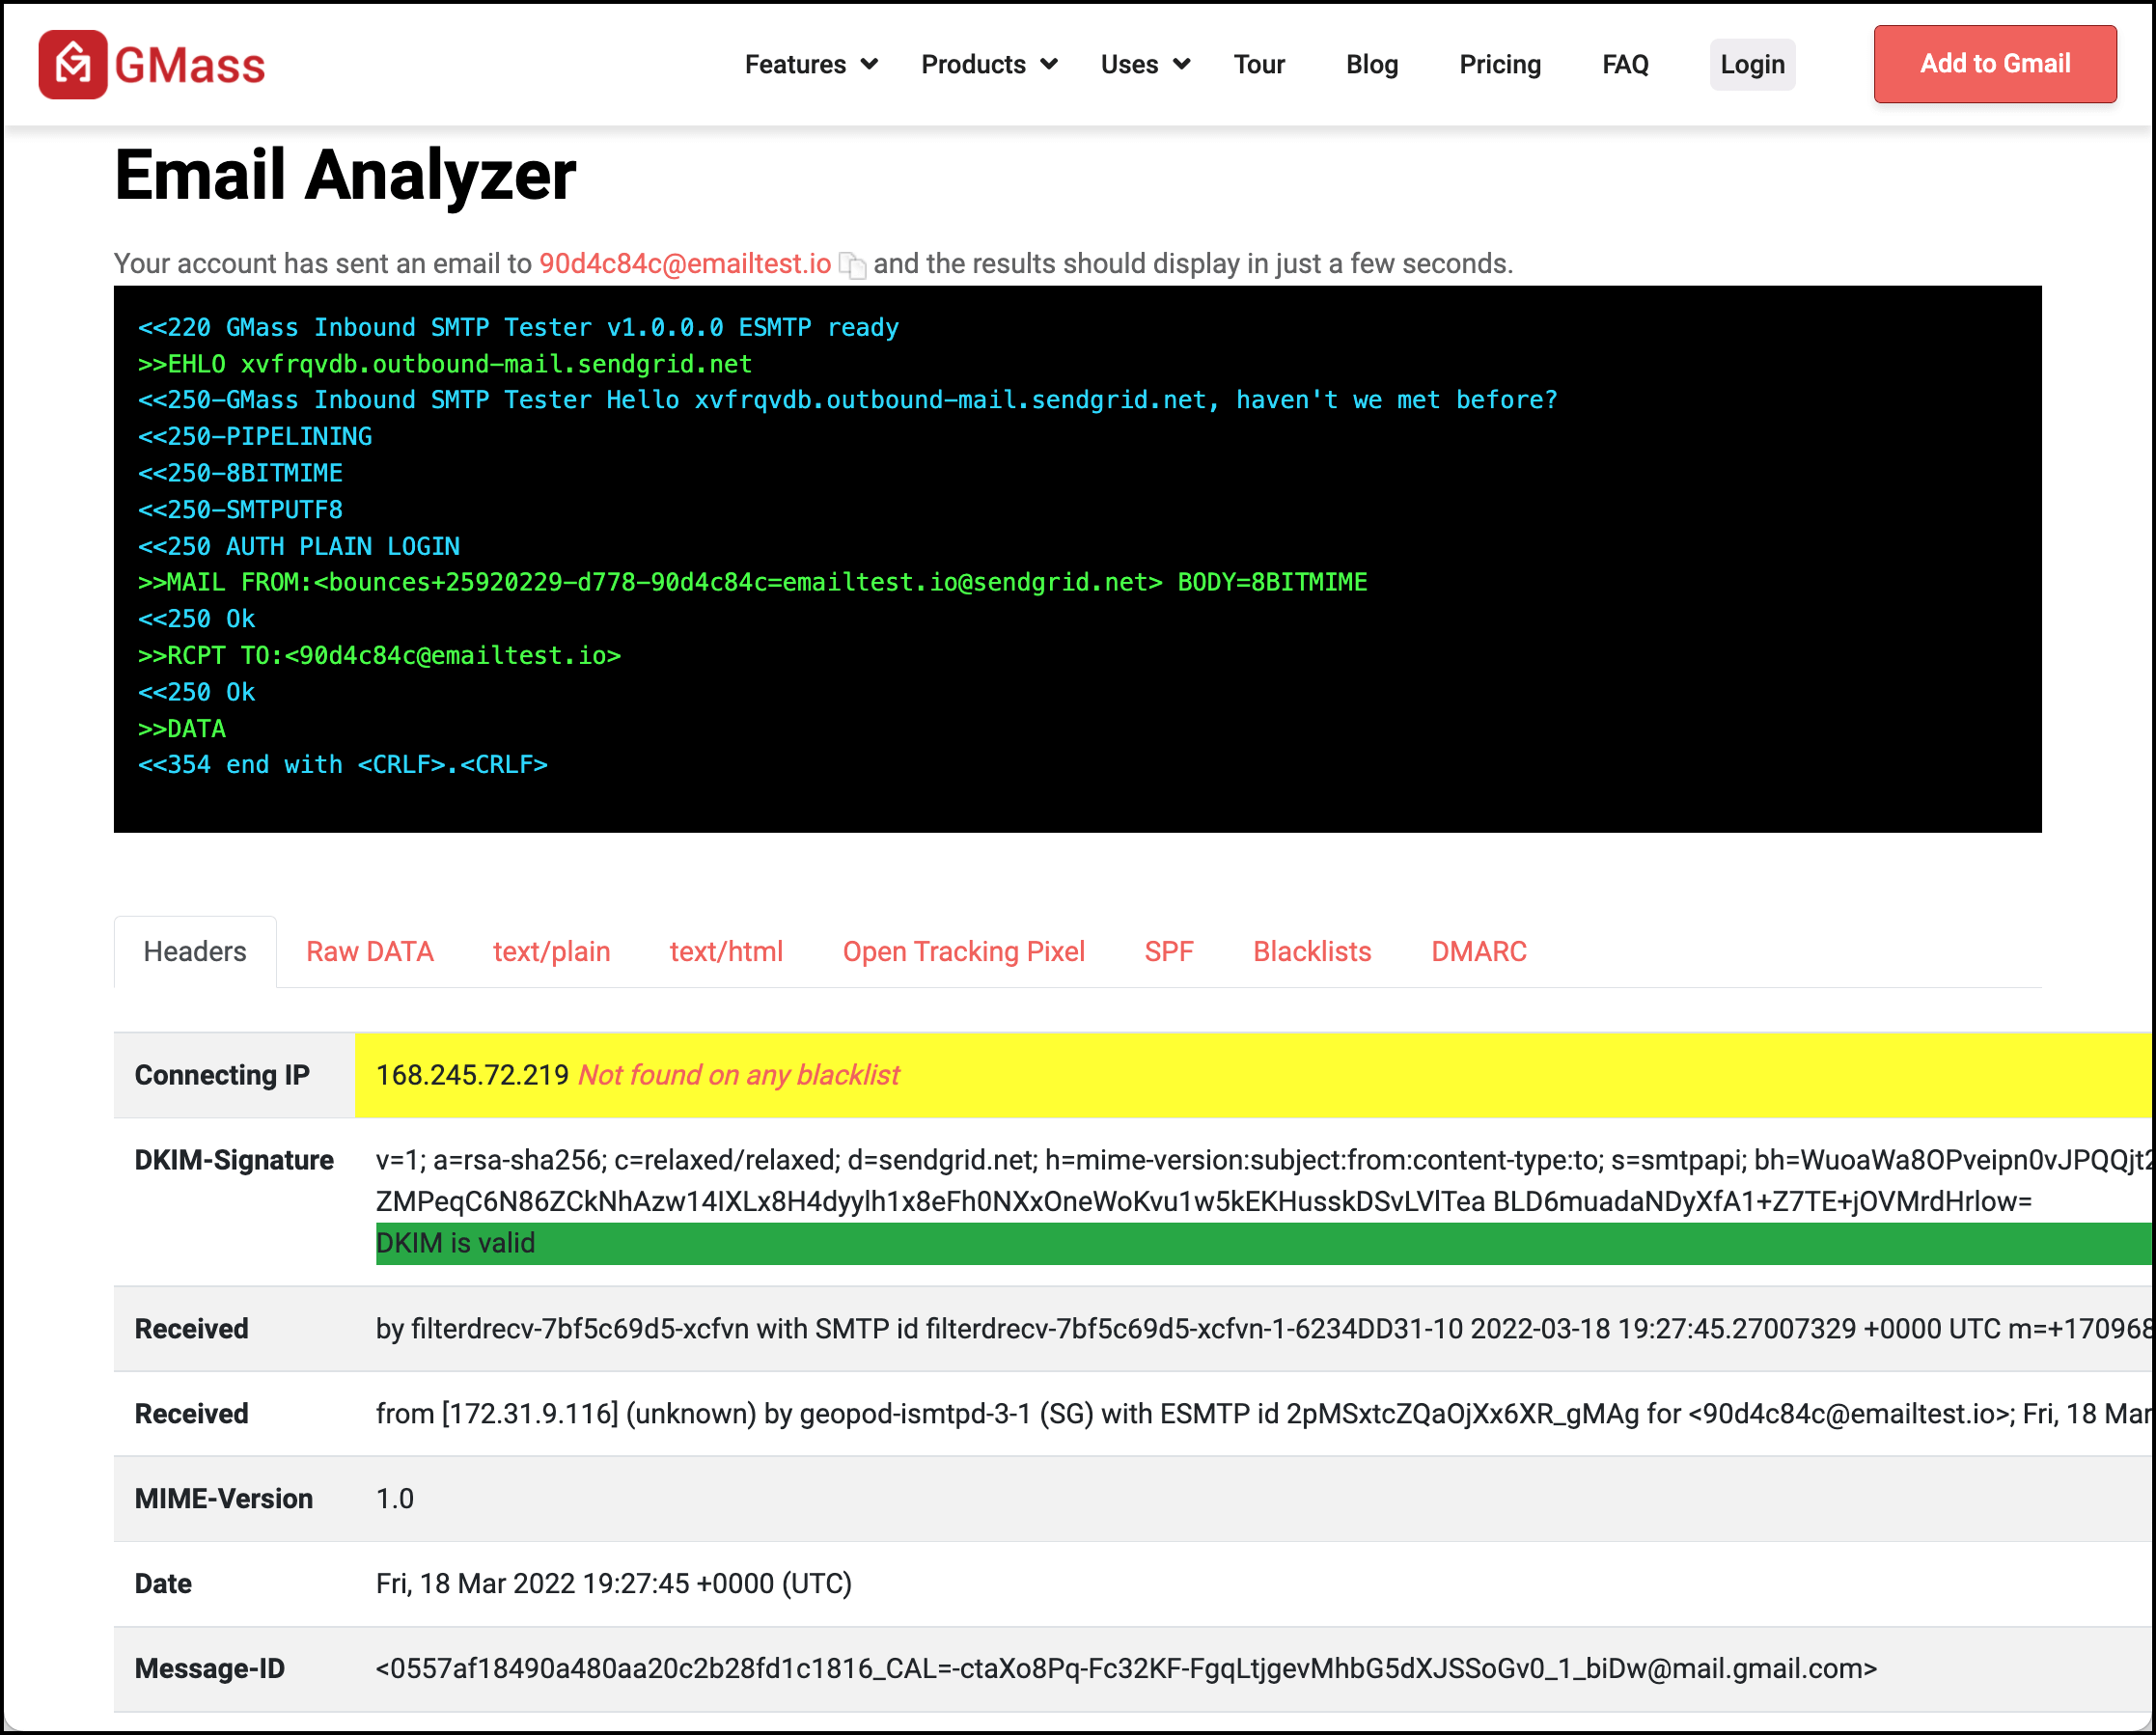 Trace the path of your emails with the Email Analyzer